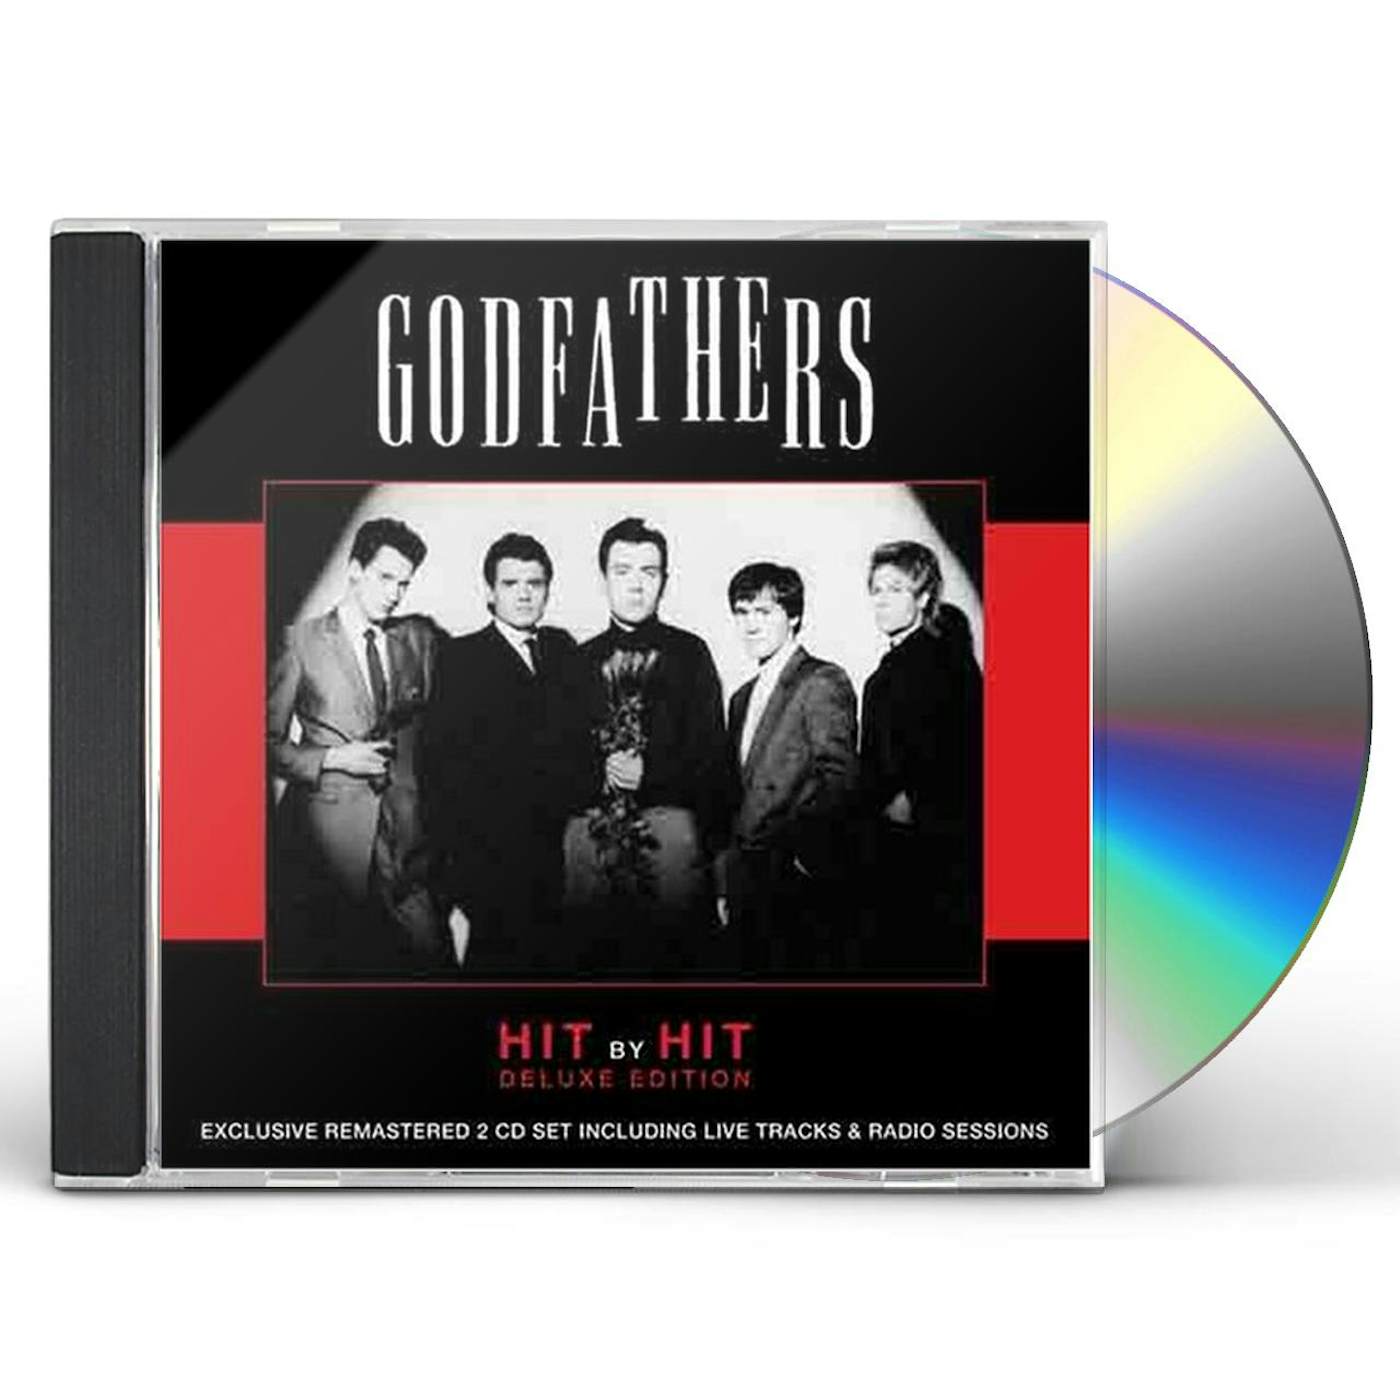 The Godfathers HIT BY HIT CD